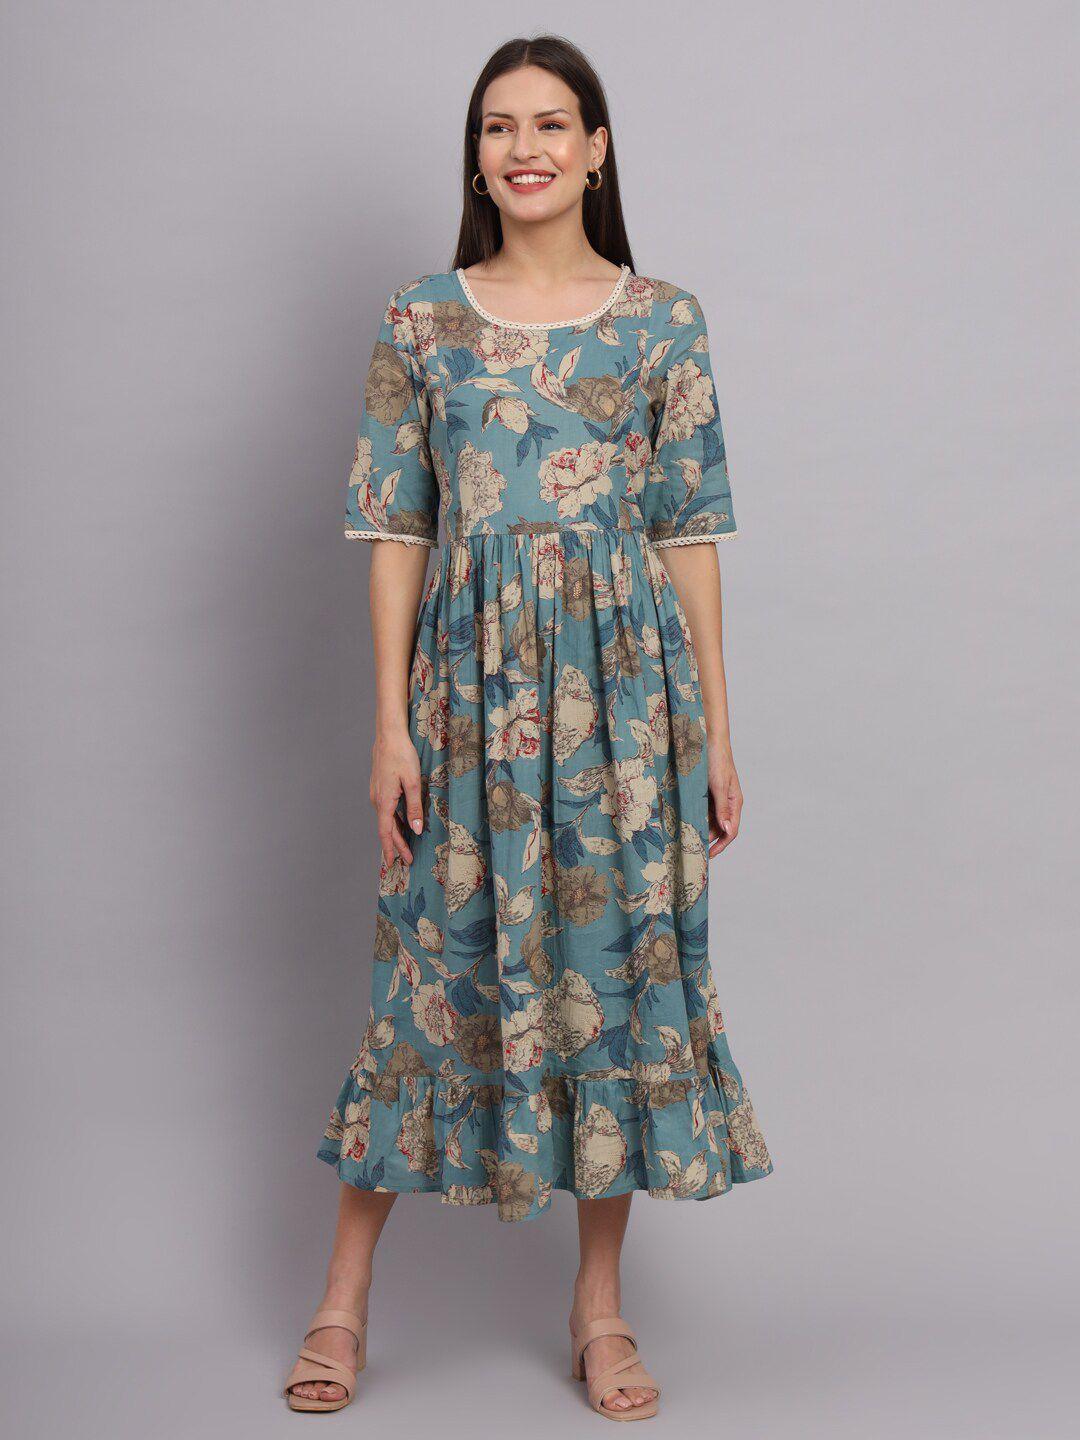 deckedup round neck floral printed gathered lace-up detail cotton a-line midi dress